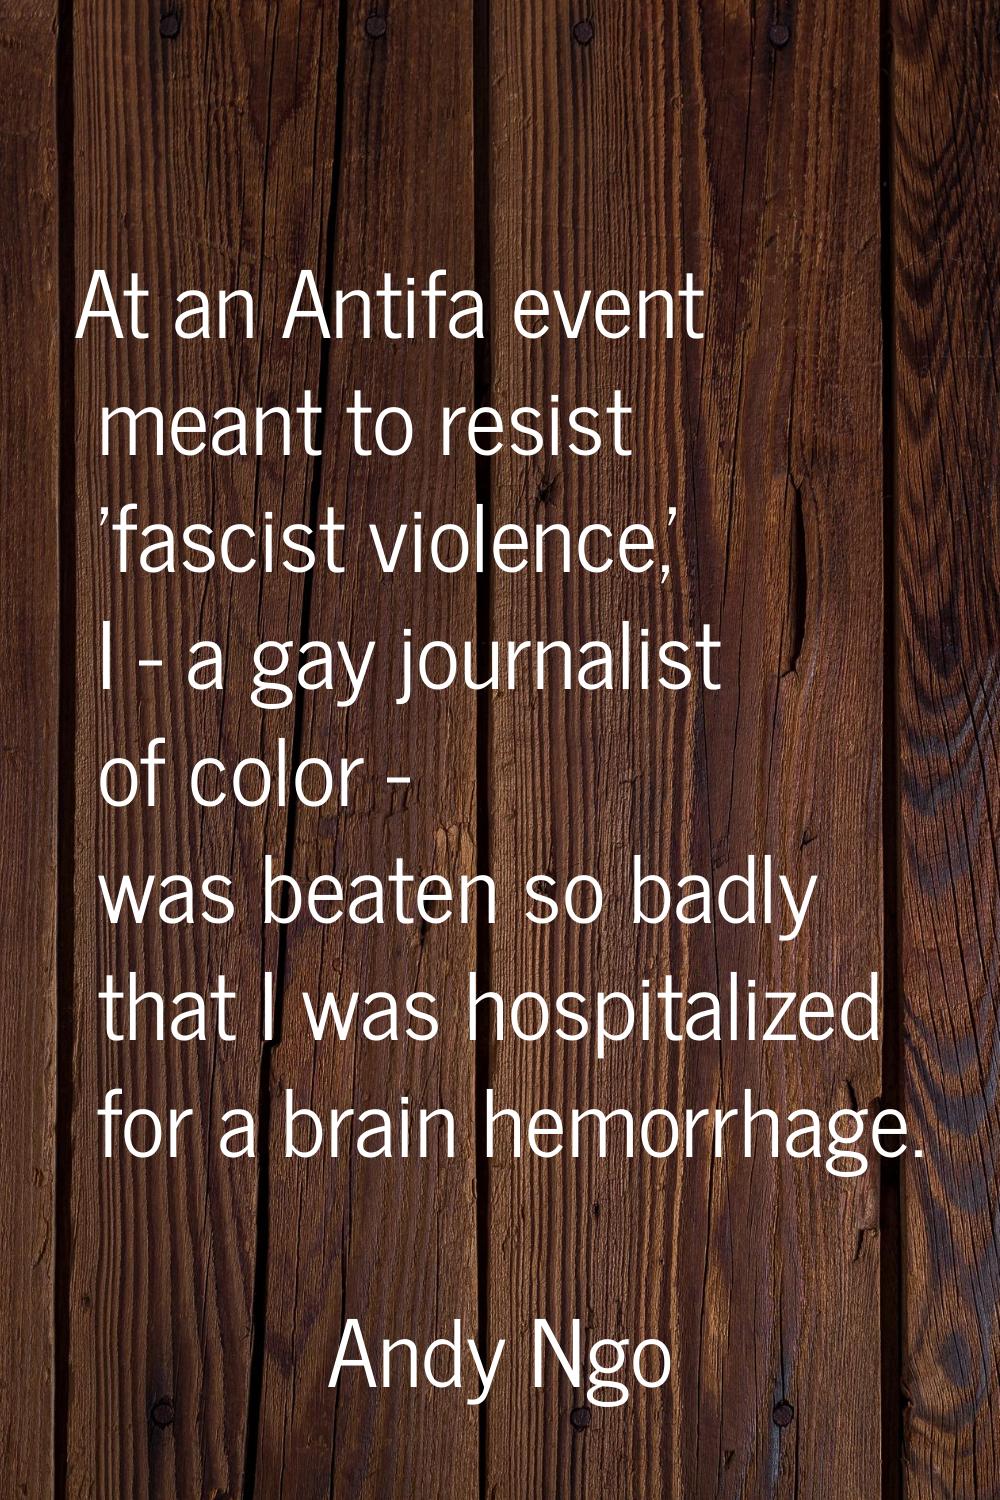 At an Antifa event meant to resist 'fascist violence,' I - a gay journalist of color - was beaten s